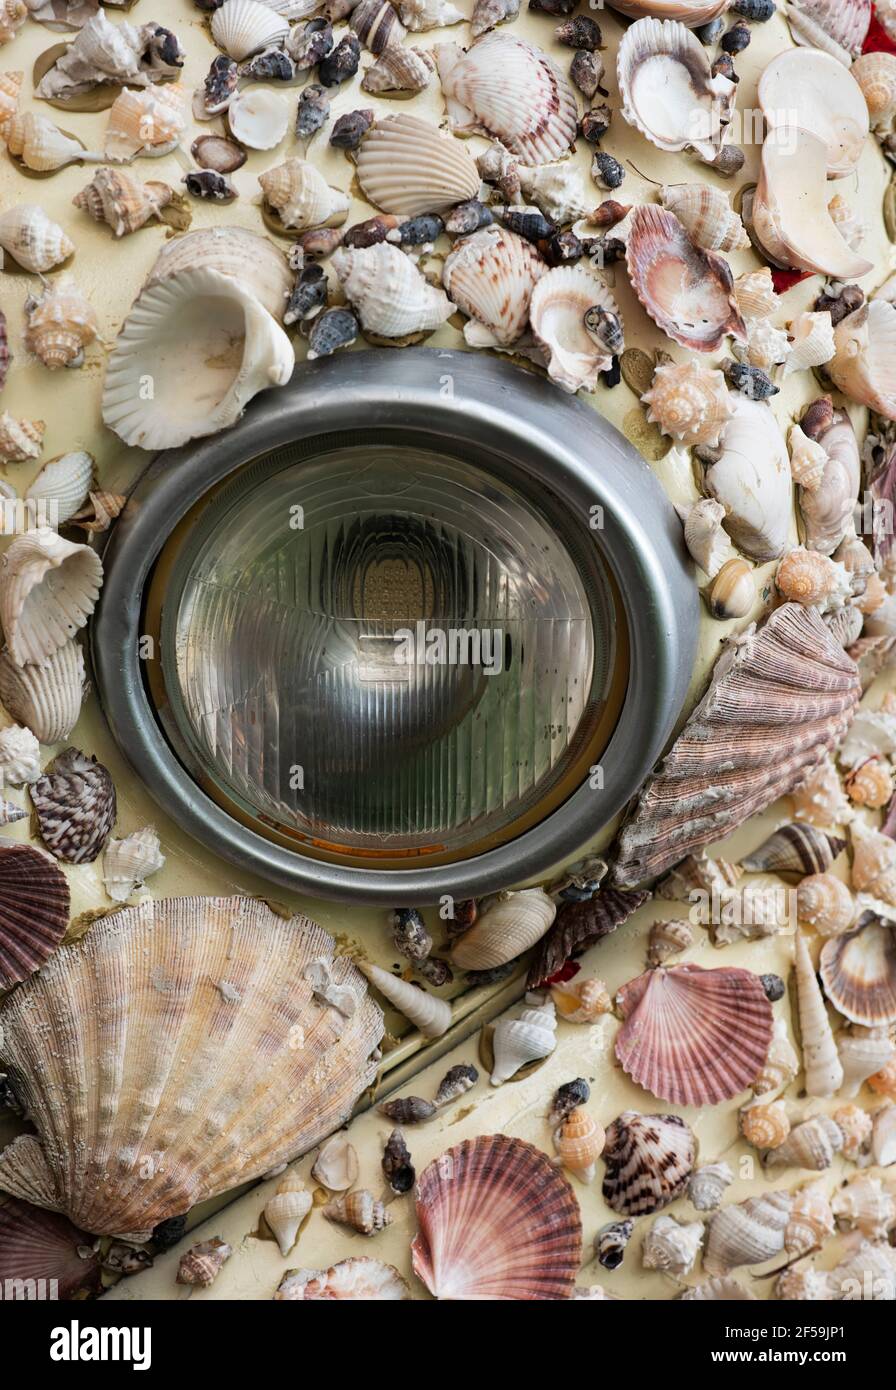 Close-up of a car headlight in the center of seashells scattered all around. Imaginative graphic art concept Stock Photo